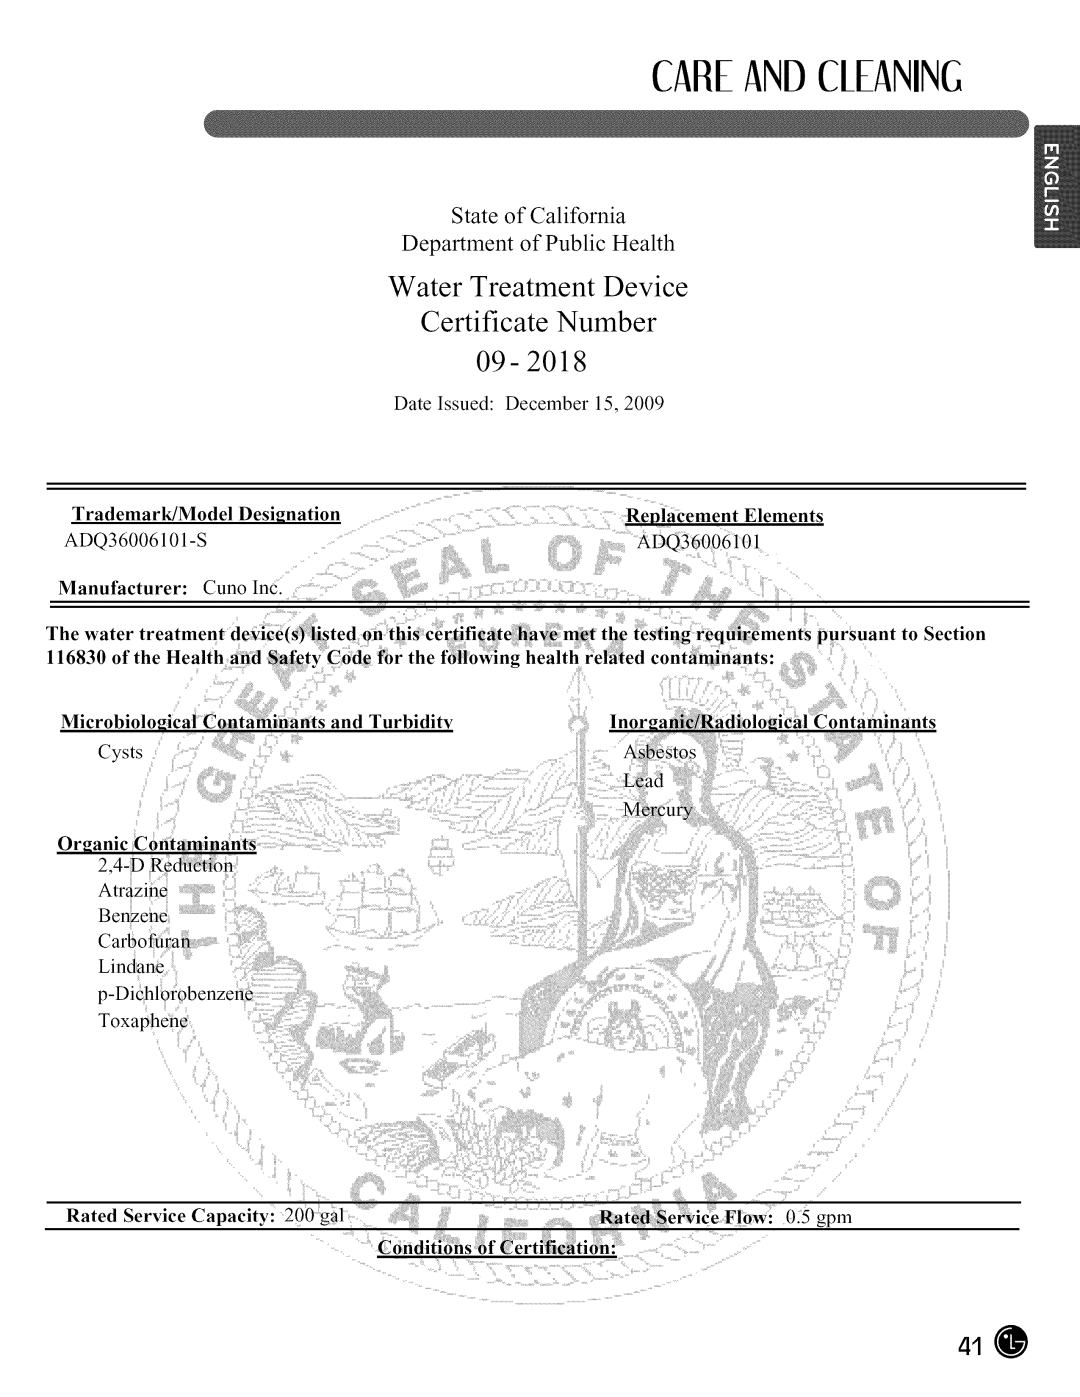 LG Electronics LMX28988 State of California Department of Public Health, Careandcleaning, Trademark/Model, Designation 